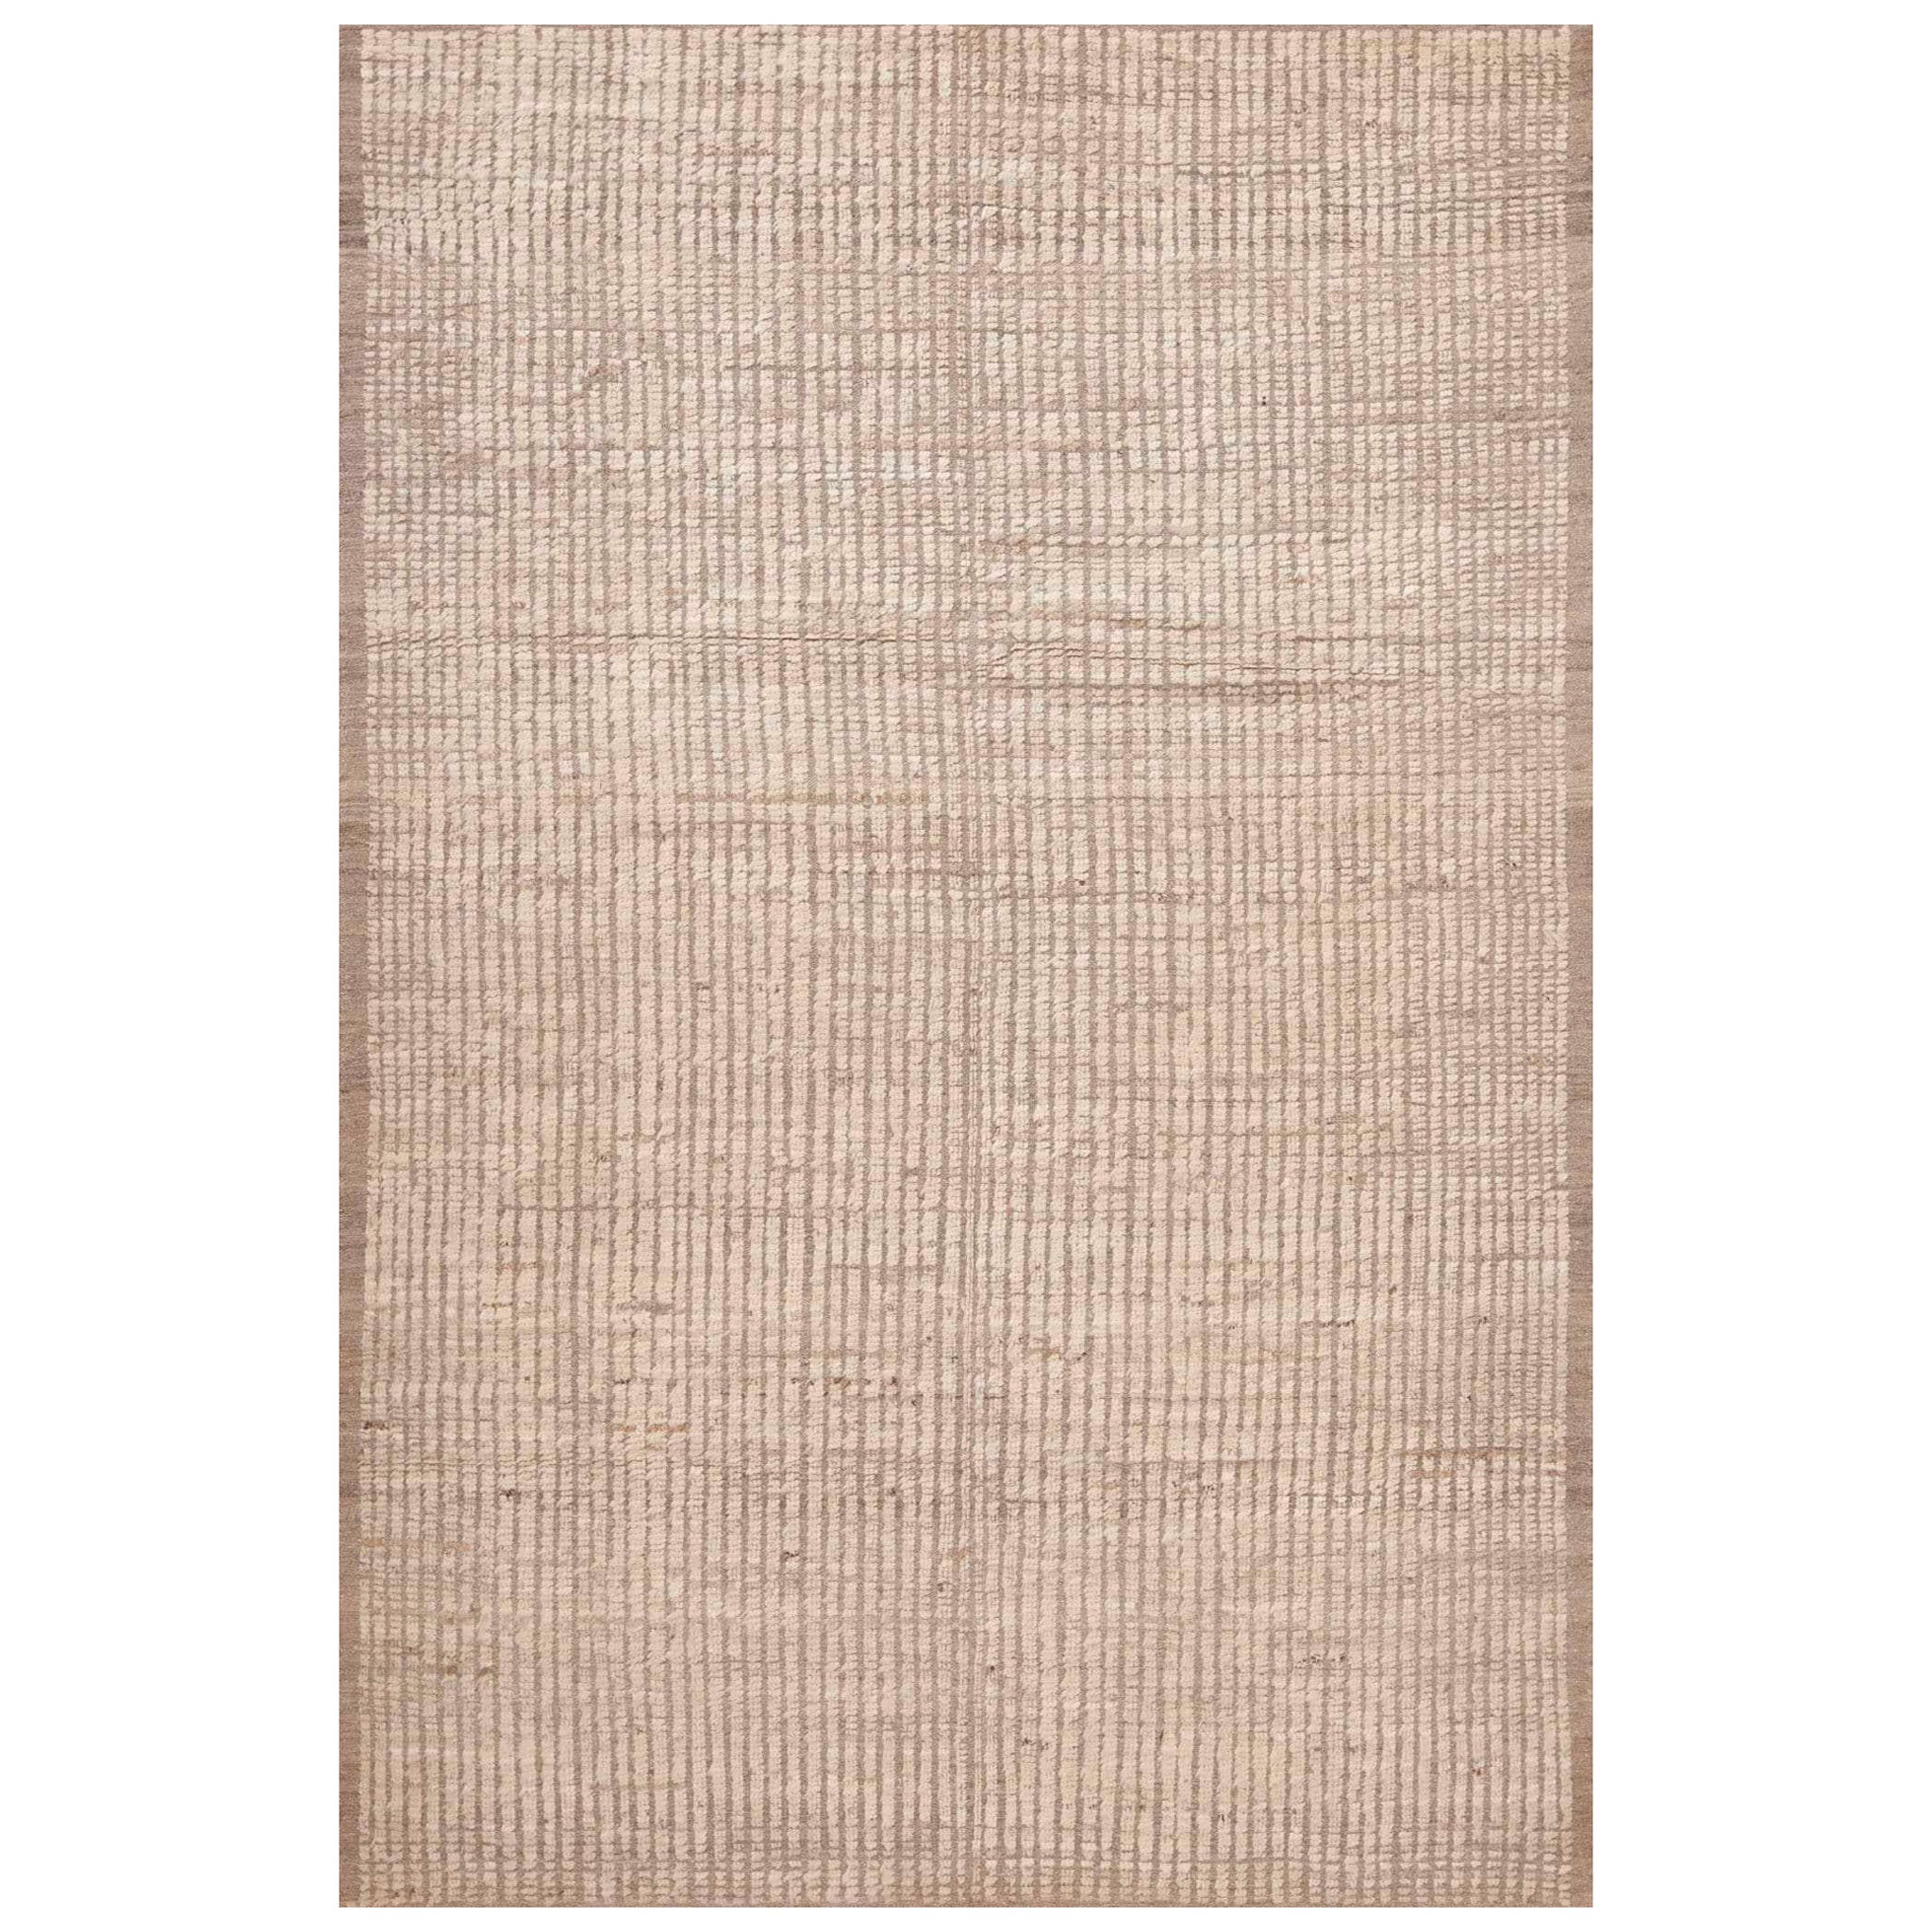 Nazmiyal Collection Minimalist Design Soft Wool Pile Modern Area Rug 6' x 9' For Sale